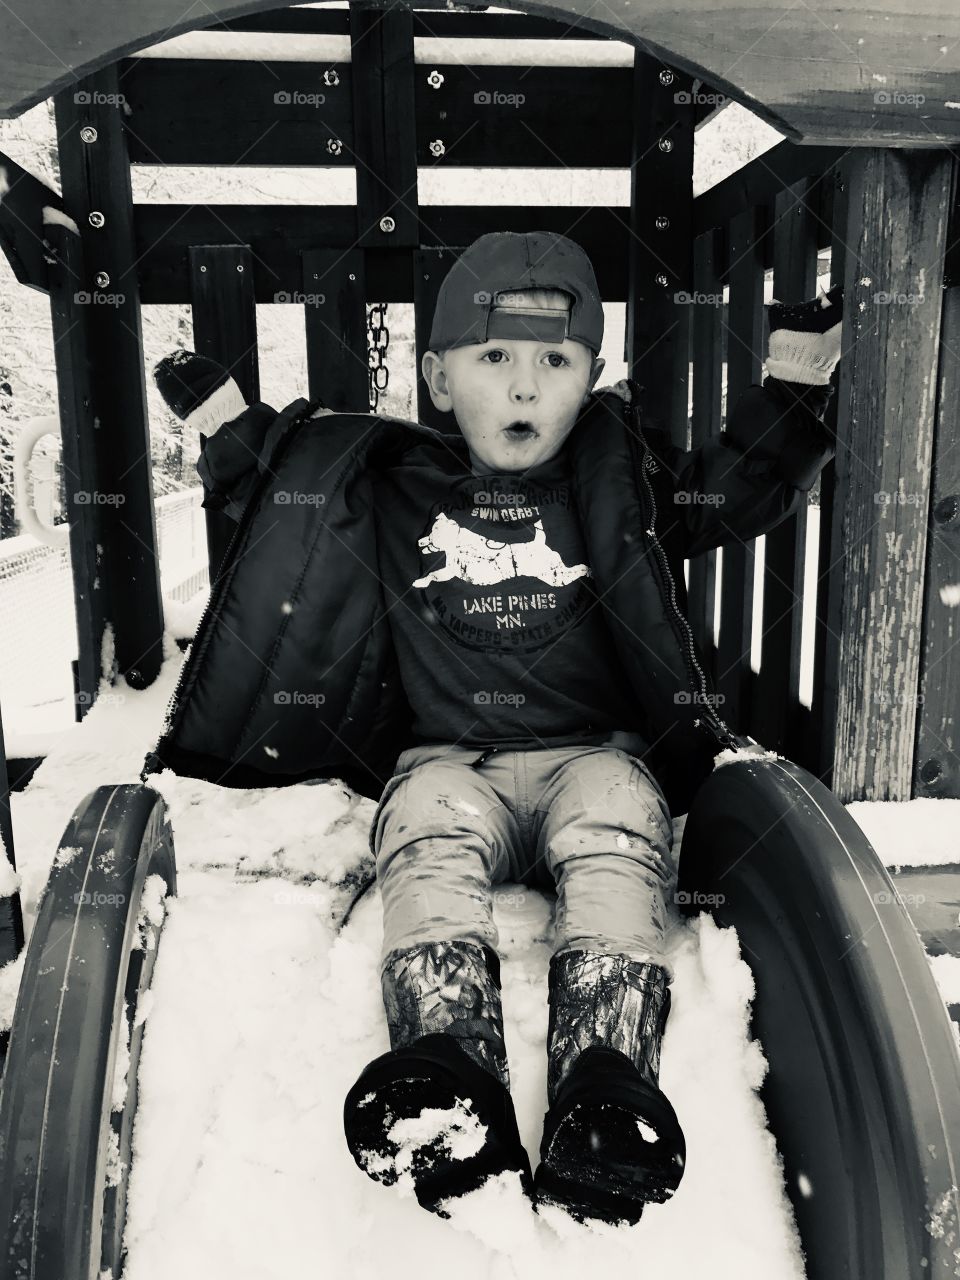 There is snow day like the one we’re having today. His first time in the snow and what he thinks about it is plainly written on his face. Nothing better than a day of playing in the snow with his best friend who goes by the name mommy.